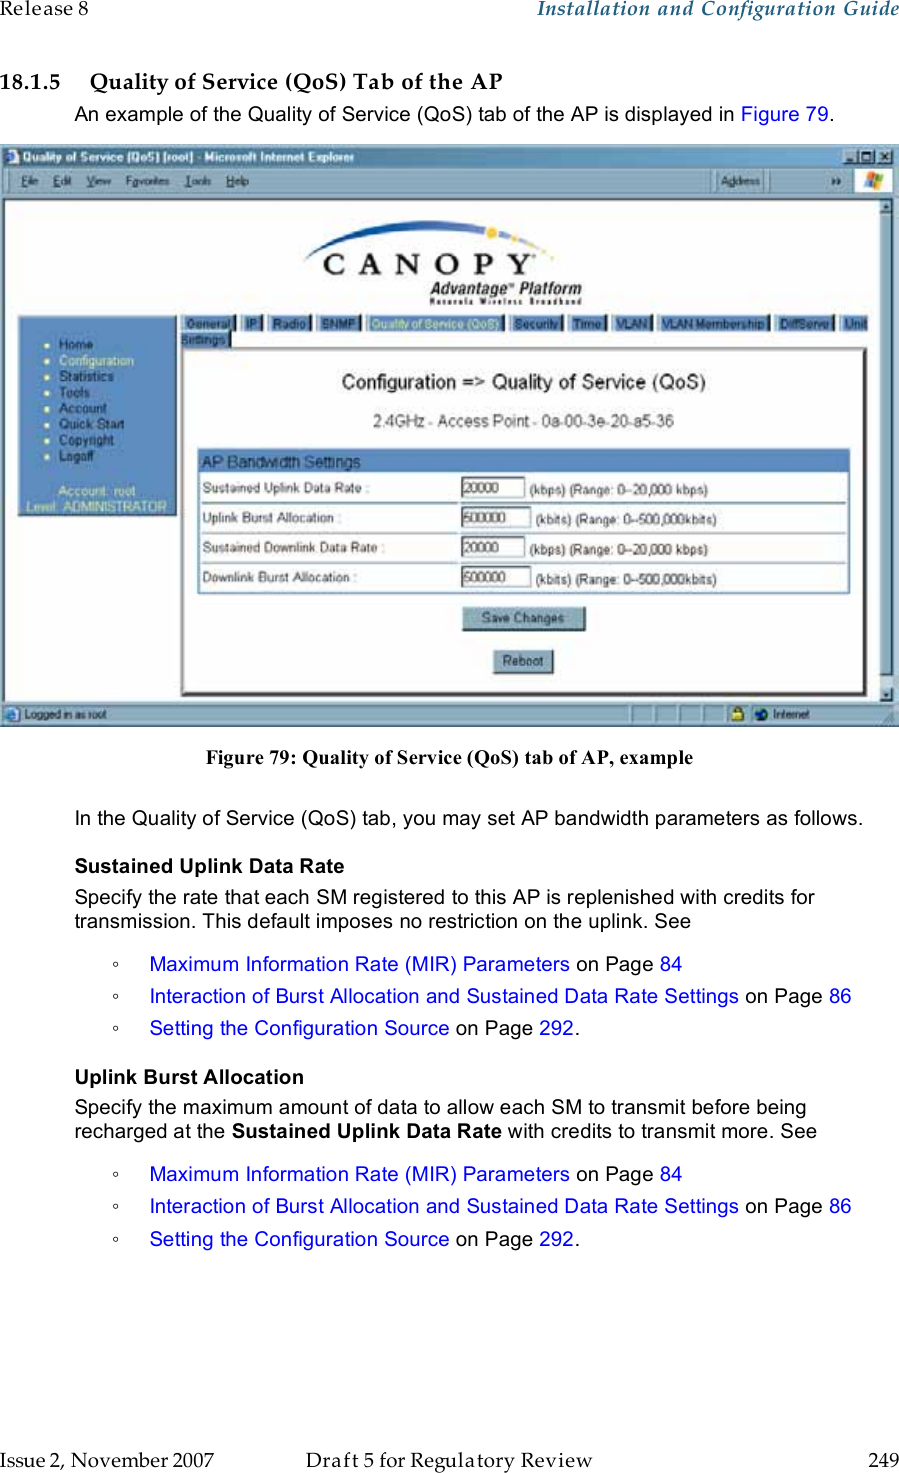 Release 8    Installation and Configuration Guide   Issue 2, November 2007  Draft 5 for Regulatory Review  249     18.1.5 Quality of Service (QoS) Tab of the AP An example of the Quality of Service (QoS) tab of the AP is displayed in Figure 79.  Figure 79: Quality of Service (QoS) tab of AP, example  In the Quality of Service (QoS) tab, you may set AP bandwidth parameters as follows. Sustained Uplink Data Rate Specify the rate that each SM registered to this AP is replenished with credits for transmission. This default imposes no restriction on the uplink. See  ◦ Maximum Information Rate (MIR) Parameters on Page 84 ◦ Interaction of Burst Allocation and Sustained Data Rate Settings on Page 86 ◦ Setting the Configuration Source on Page 292. Uplink Burst Allocation Specify the maximum amount of data to allow each SM to transmit before being recharged at the Sustained Uplink Data Rate with credits to transmit more. See  ◦ Maximum Information Rate (MIR) Parameters on Page 84 ◦ Interaction of Burst Allocation and Sustained Data Rate Settings on Page 86 ◦ Setting the Configuration Source on Page 292. 